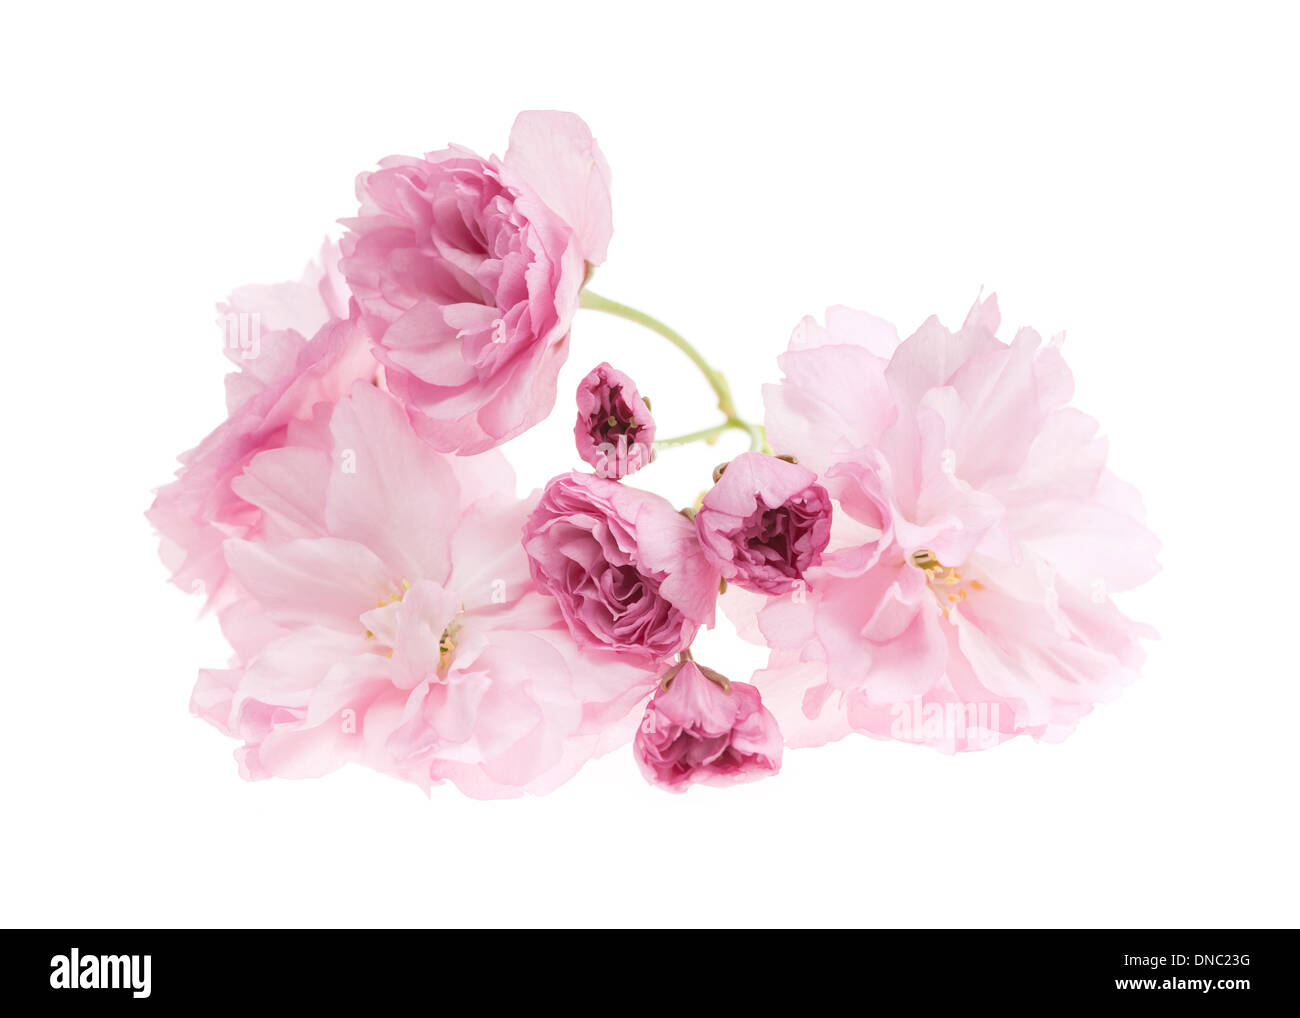 Pink cherry blossom flowers close up isolated on white background Stock Photo